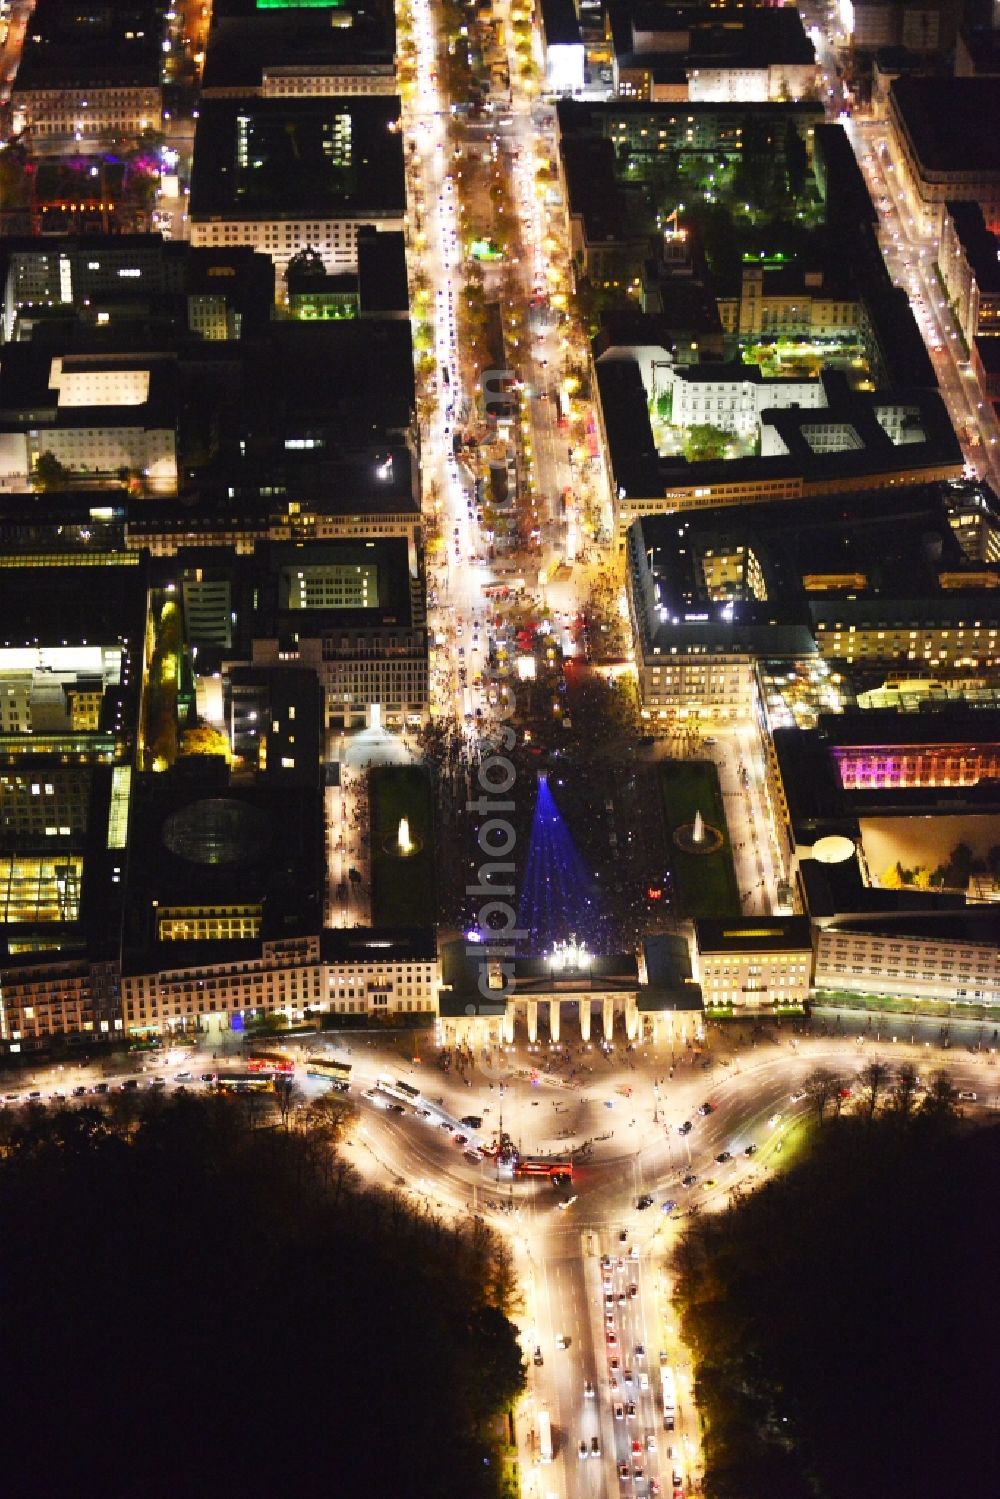 Aerial image Berlin - Night Shot: The Brandenburg Gate at the square Pariser Platz with illumination at the Festival of Lights. Warning: Commercial use on prior request only